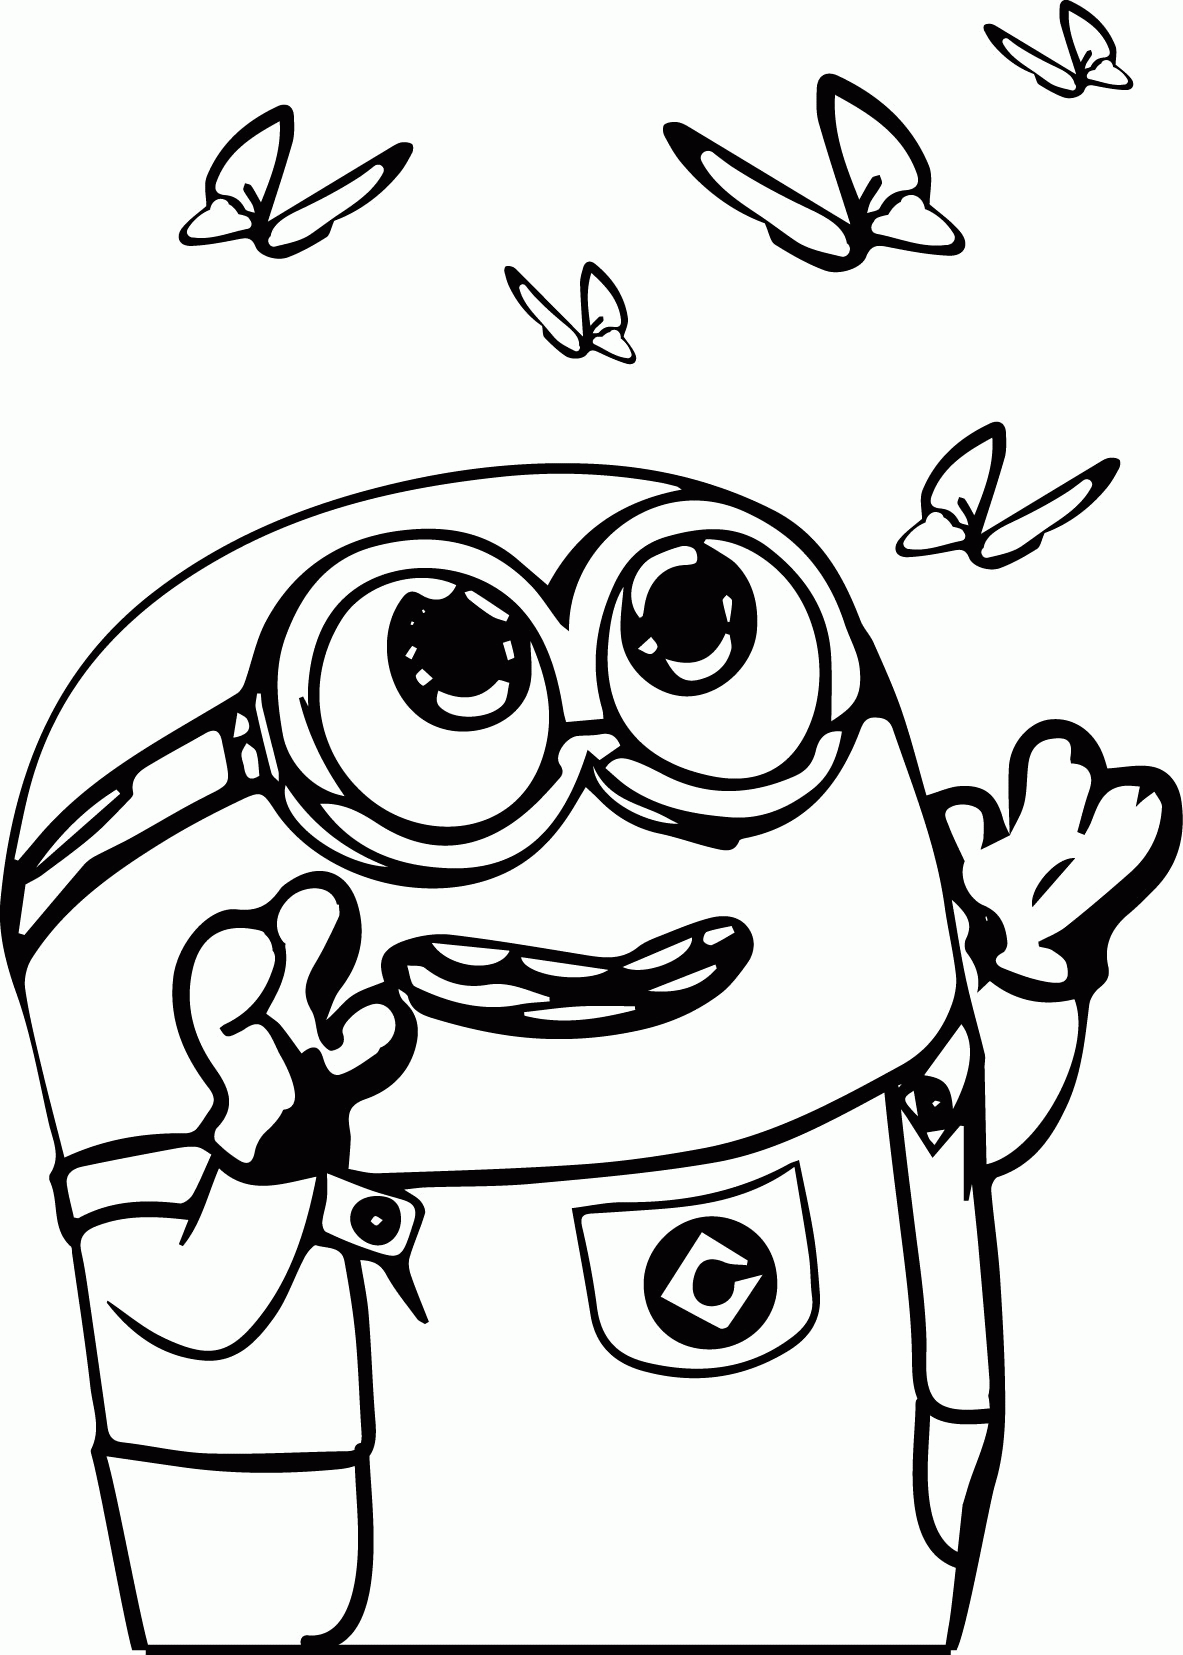 minions colouring pictures print download minion coloring pages for kids to have minions colouring pictures 